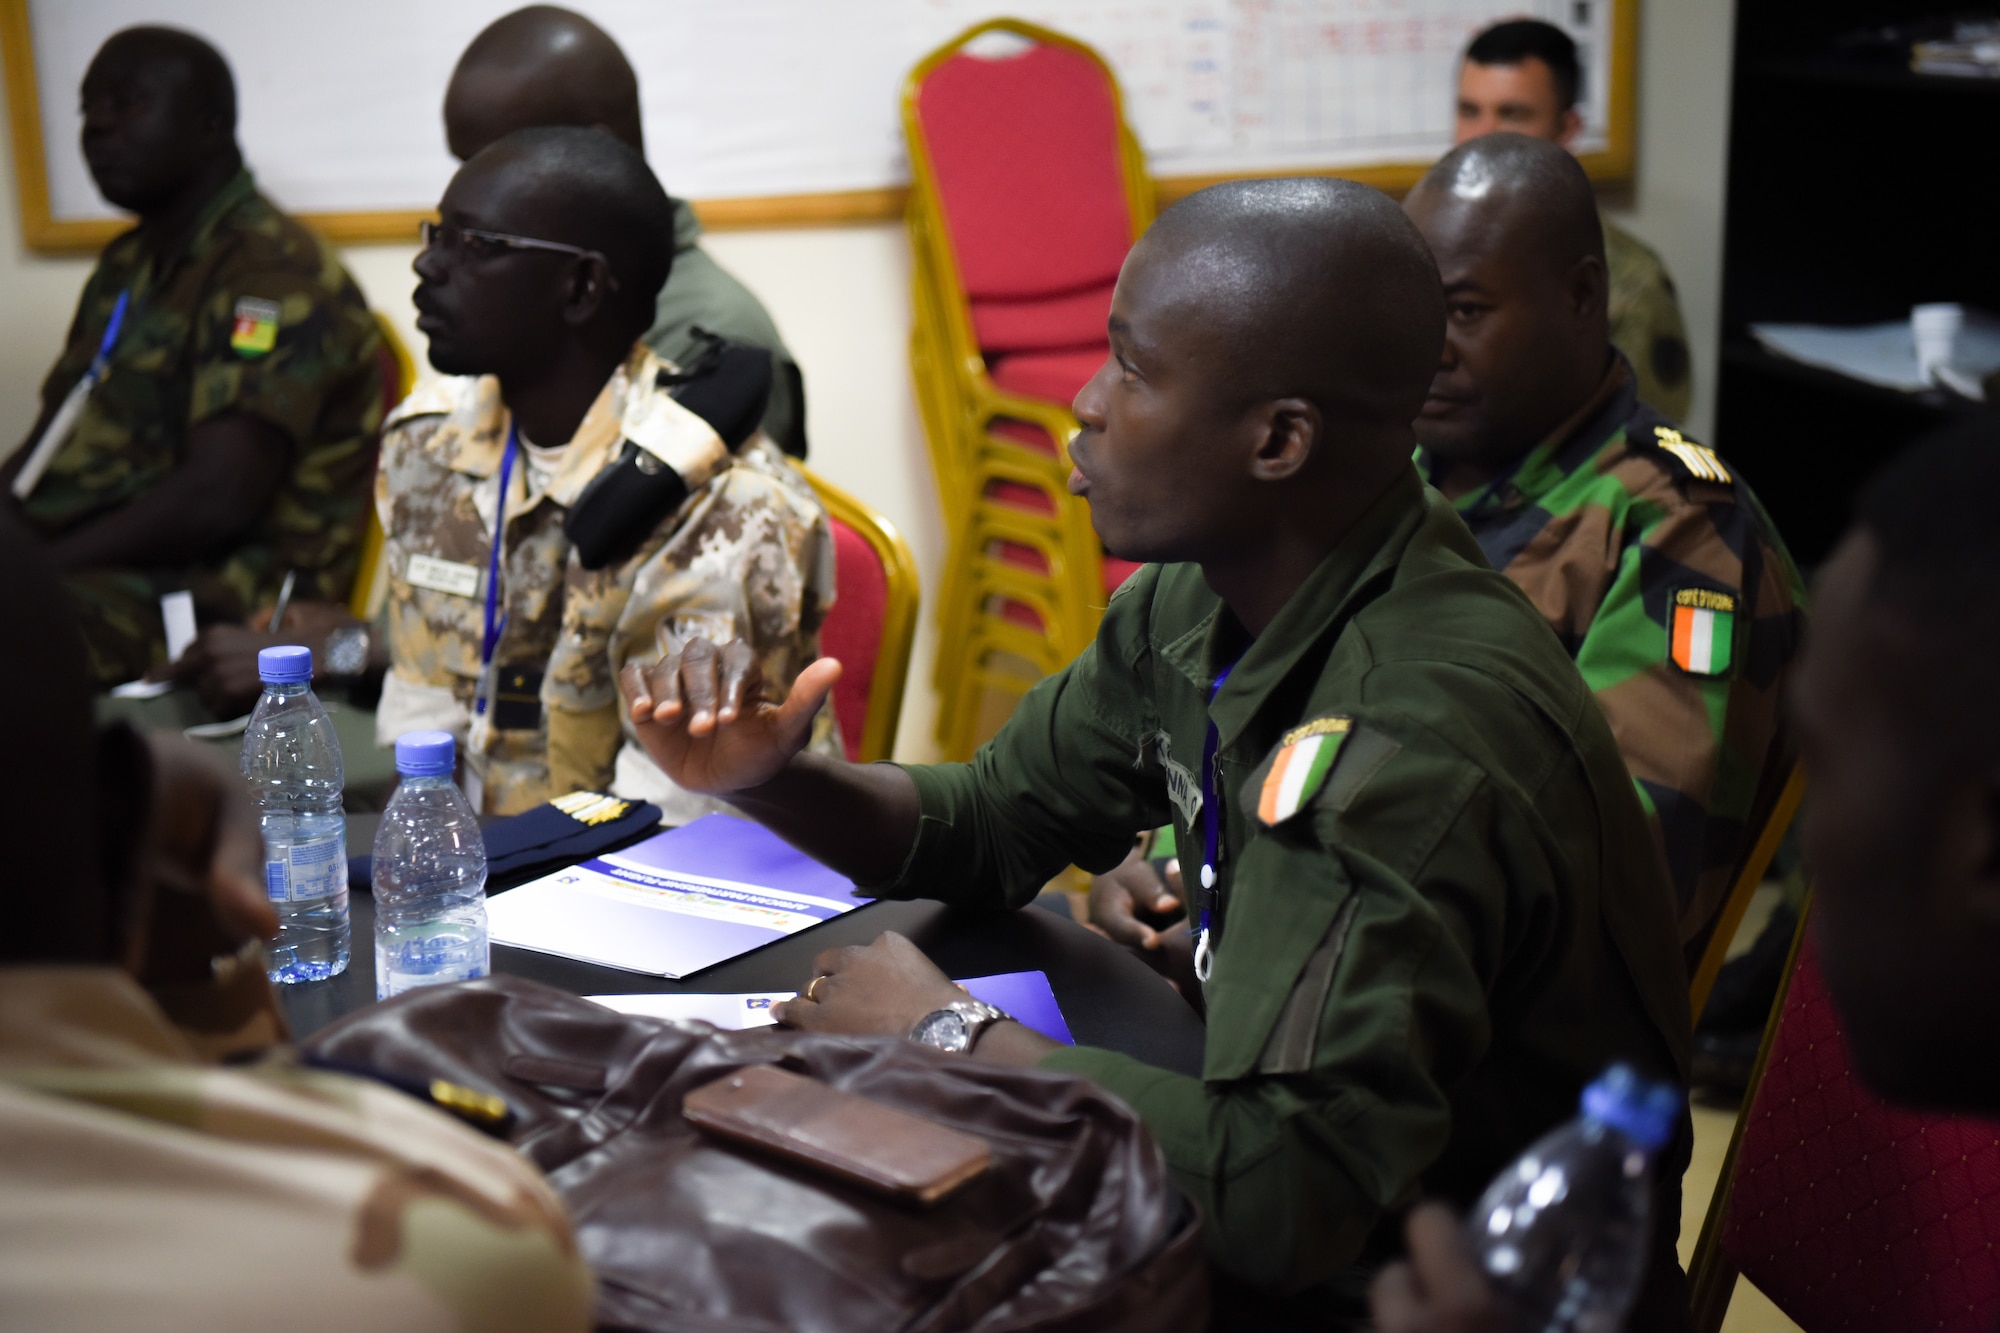 Ivoirian Maj. Katienna Ouattara, asks a question at group discussions for air and ground safety during African Partnership Flight Senegal at Captain Andalla Cissé Air Base, Senegal, March 20, 2018. APF Senegal supports U.S. Africa Command’s priority to build capacity for humanitarian assistance and disaster response with African partners. (U.S. Air Force photo by Capt. Kay Magdalena Nissen)